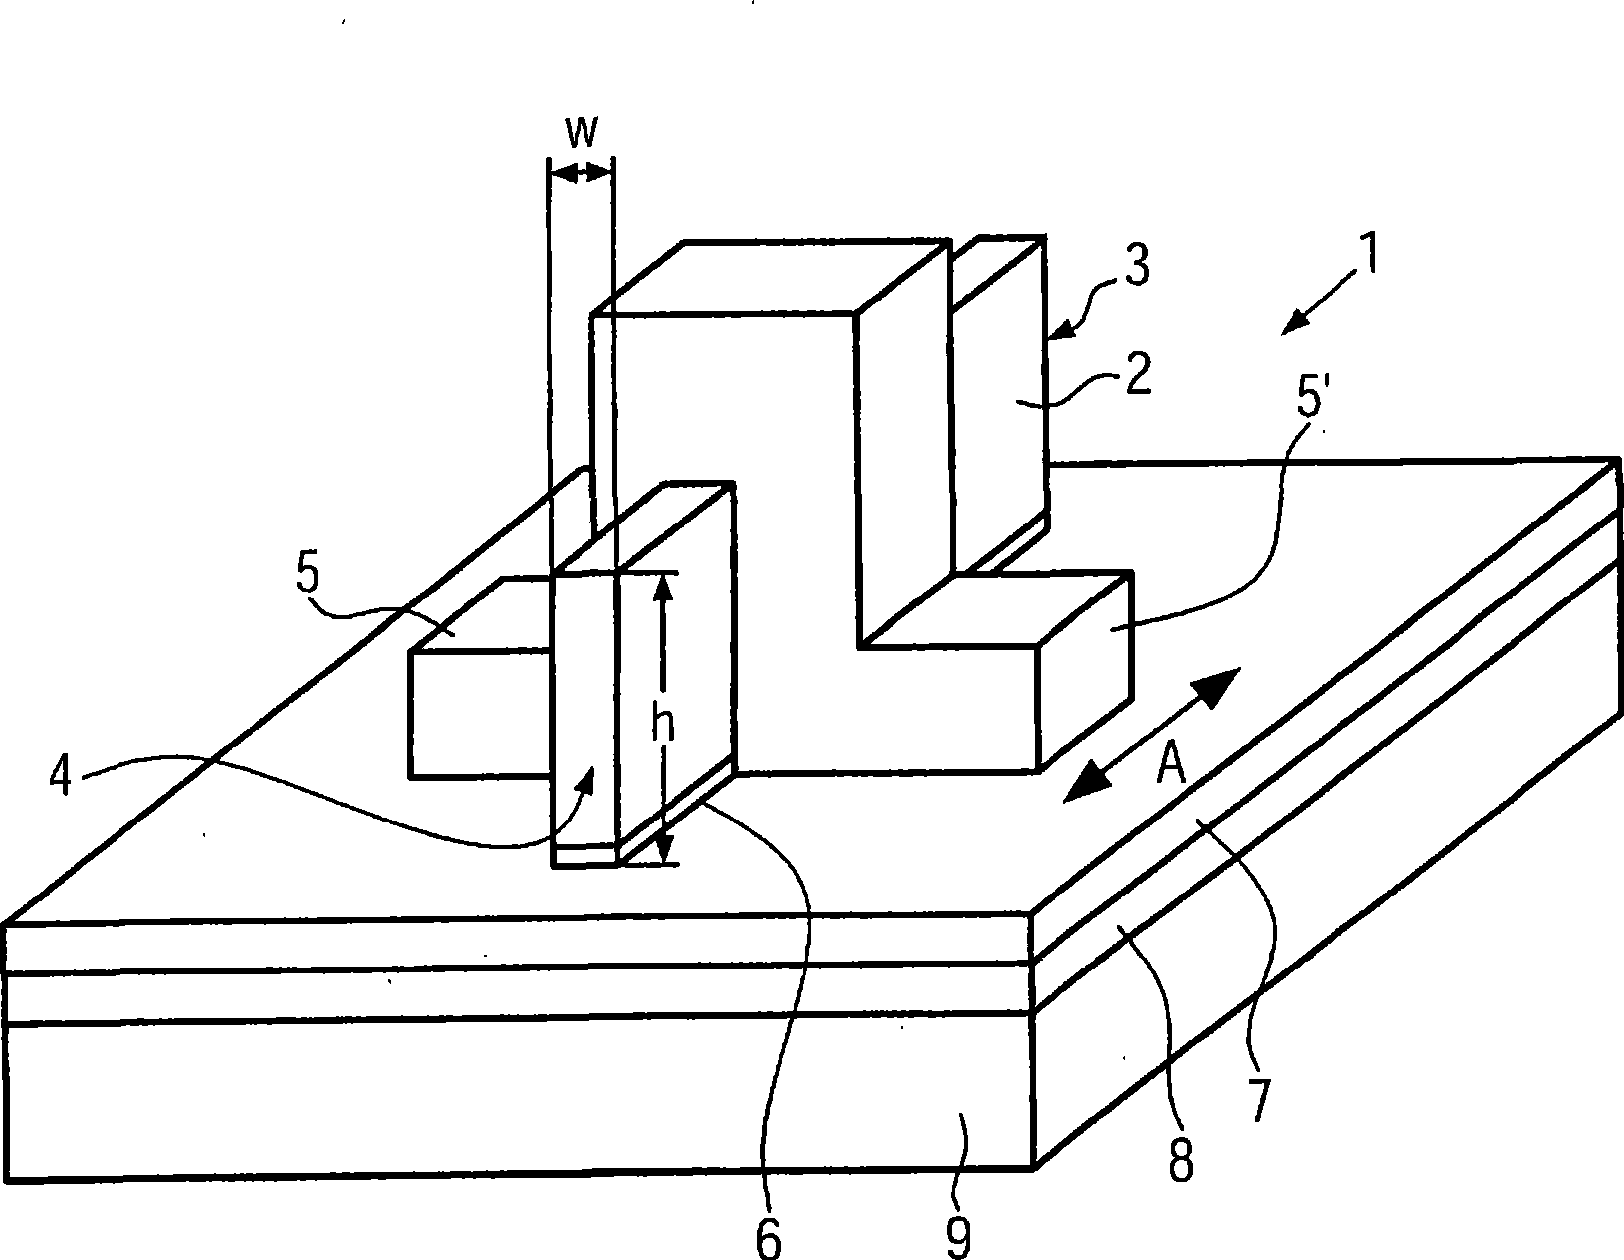 Multiple gate field effect transistor structure and method for fabricating same